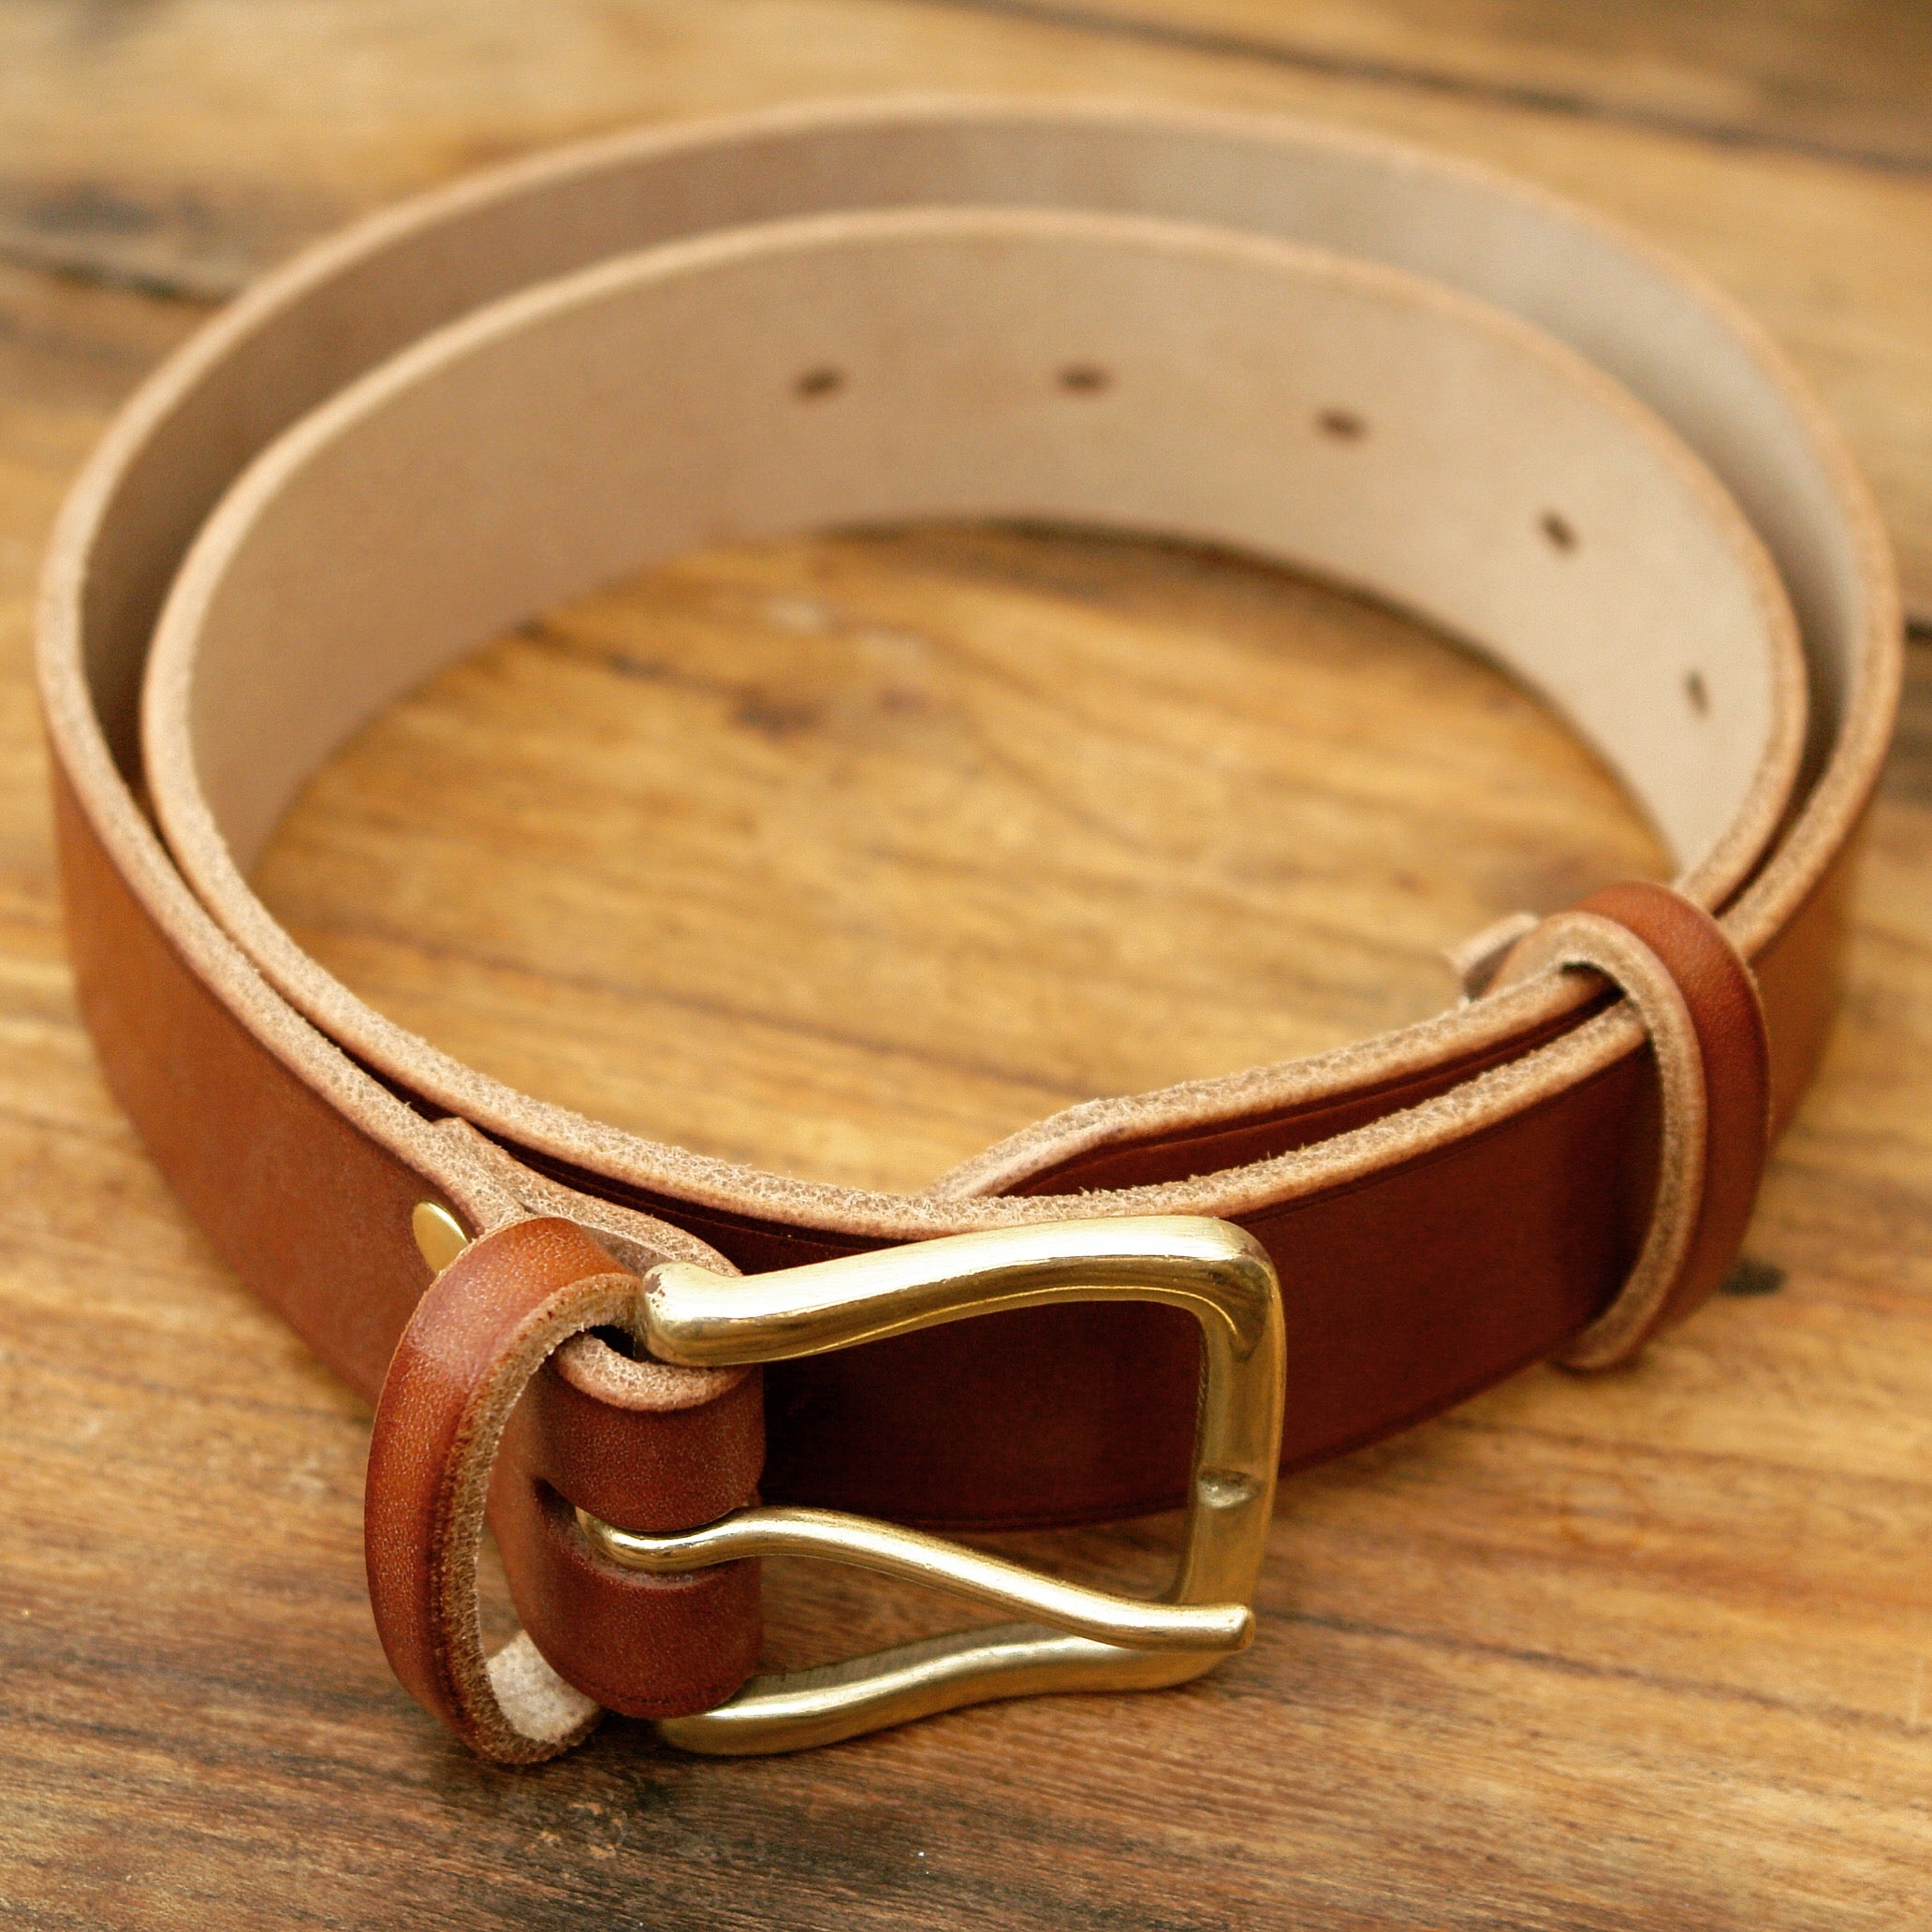 Hand crafted leather belt made in England